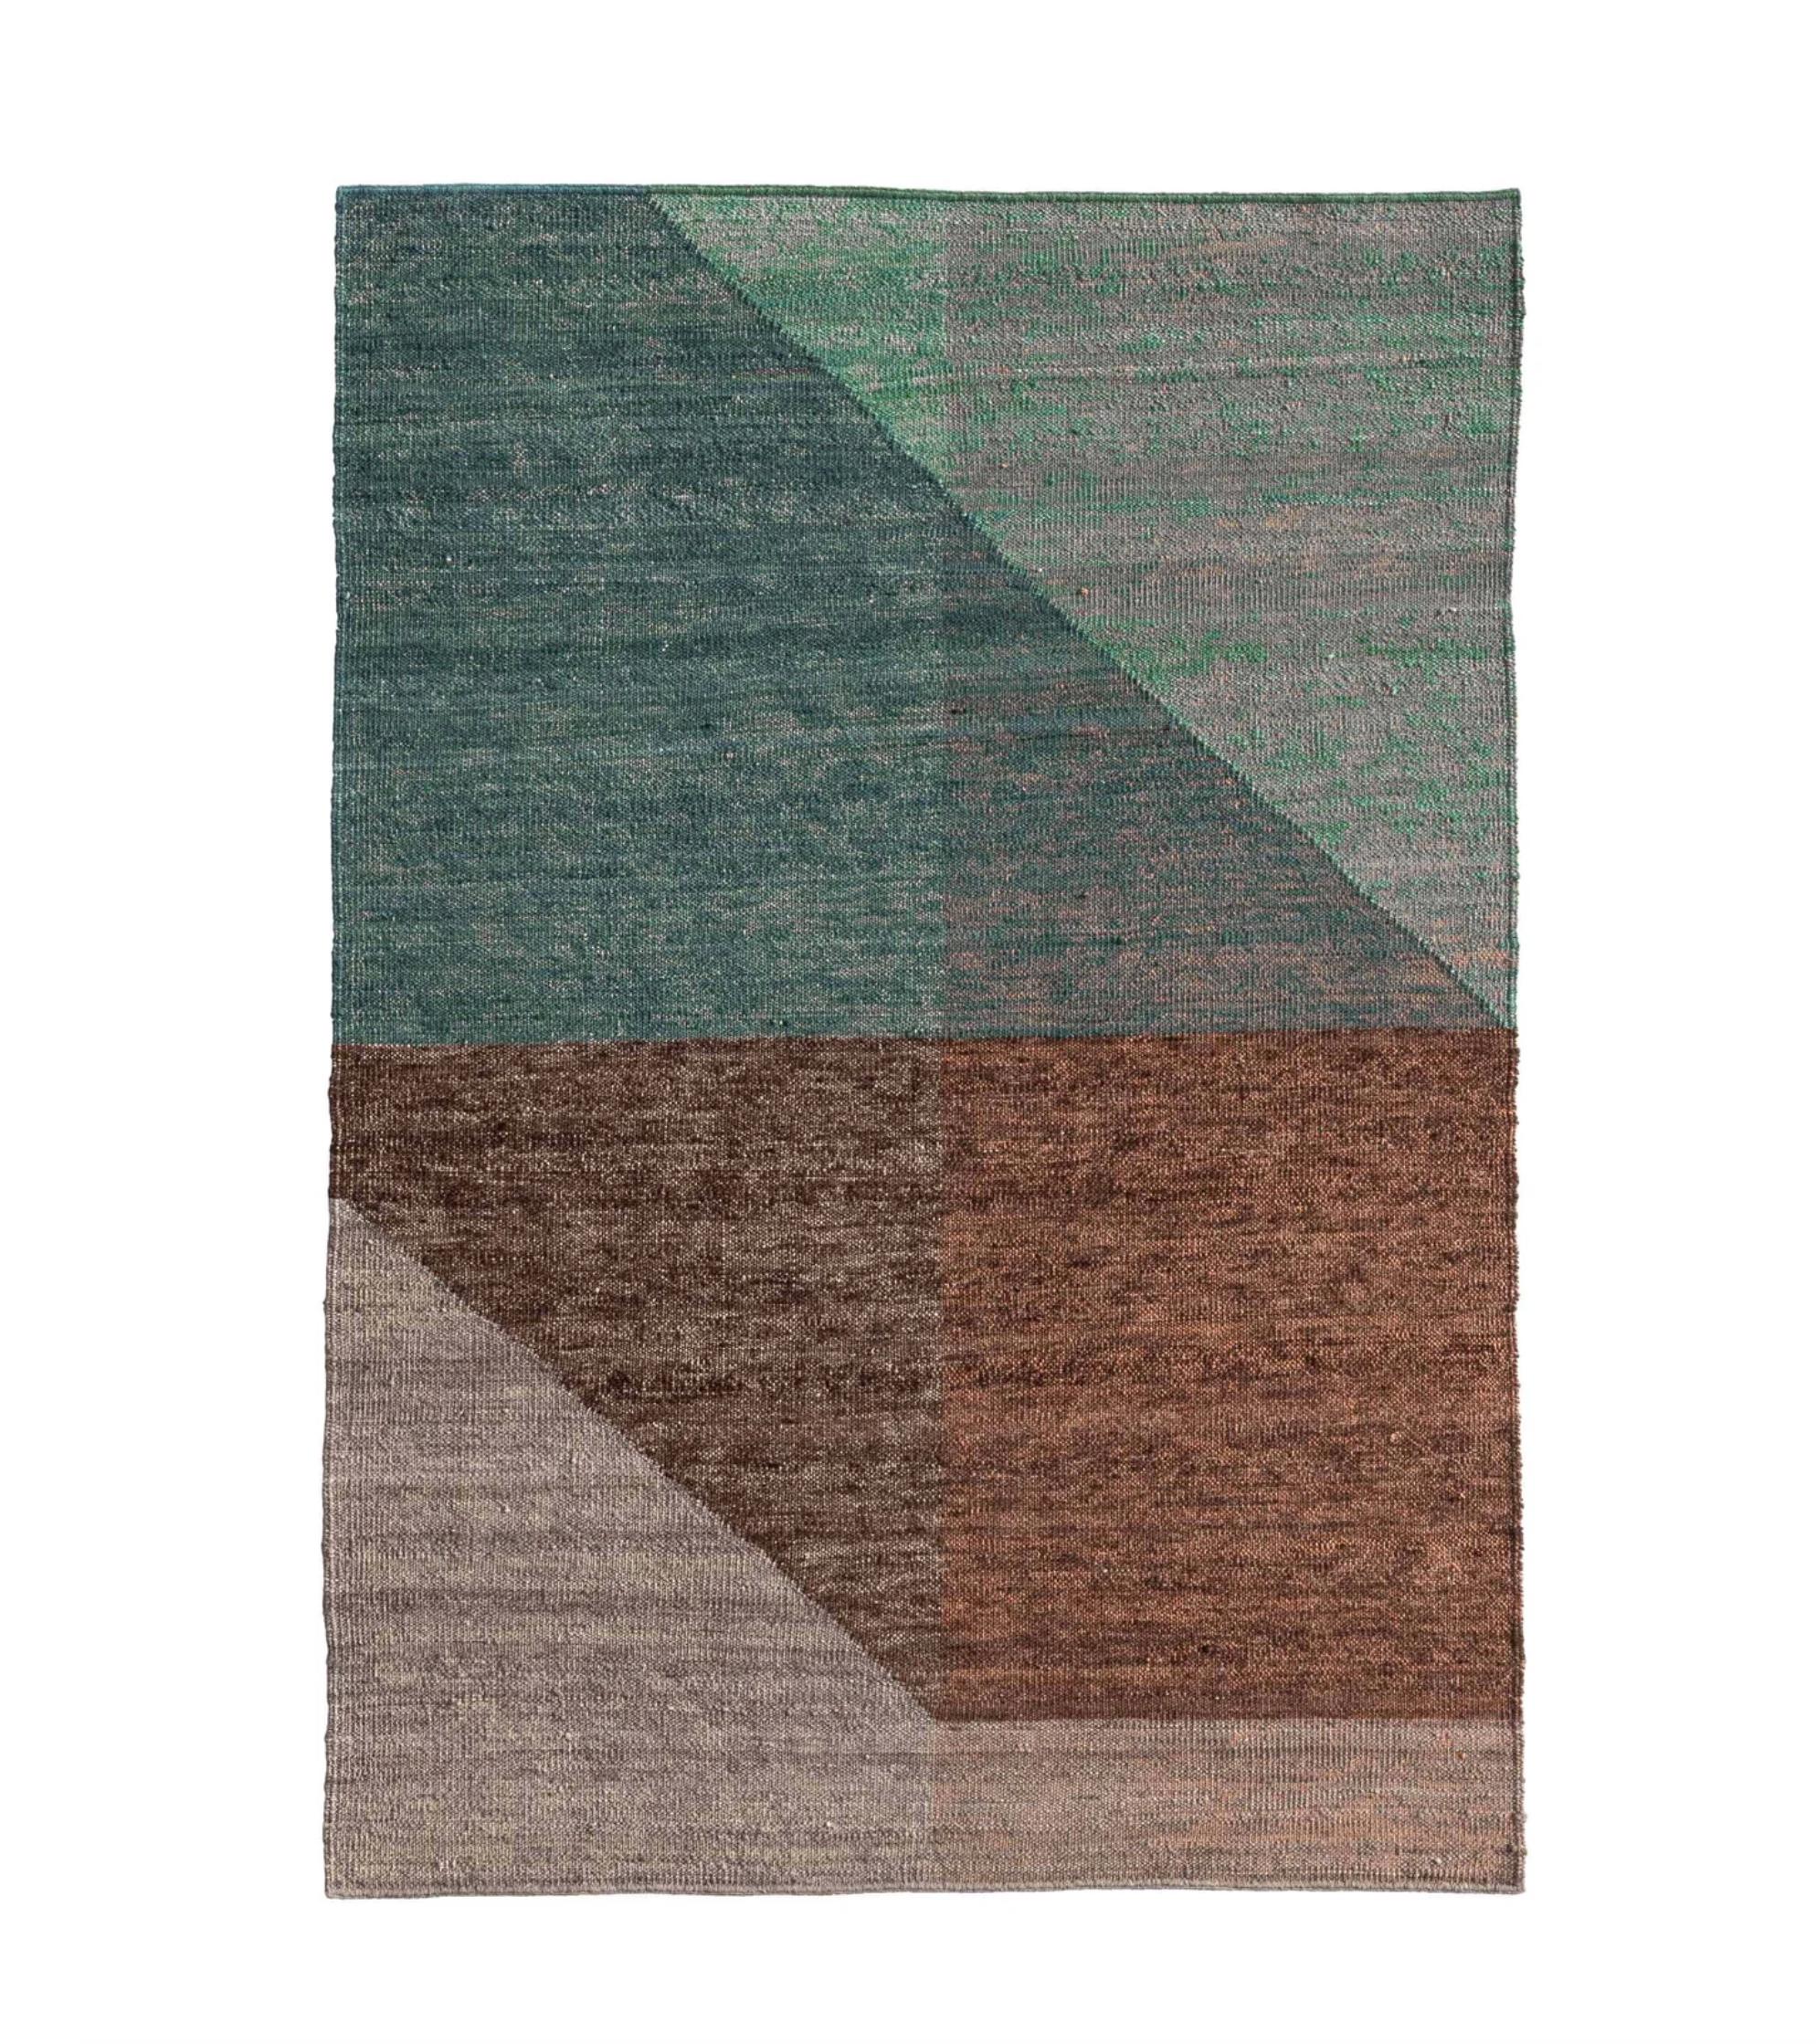 Mathias Hahn 'Capas 2' Kilim Rug for Nanimarquina. Current production, Spain.

By using layers, Mathias Han manages to create a variety of tonalities, textures and shades. This is a light and informal rug, hand-woven using the ancestral Kilim